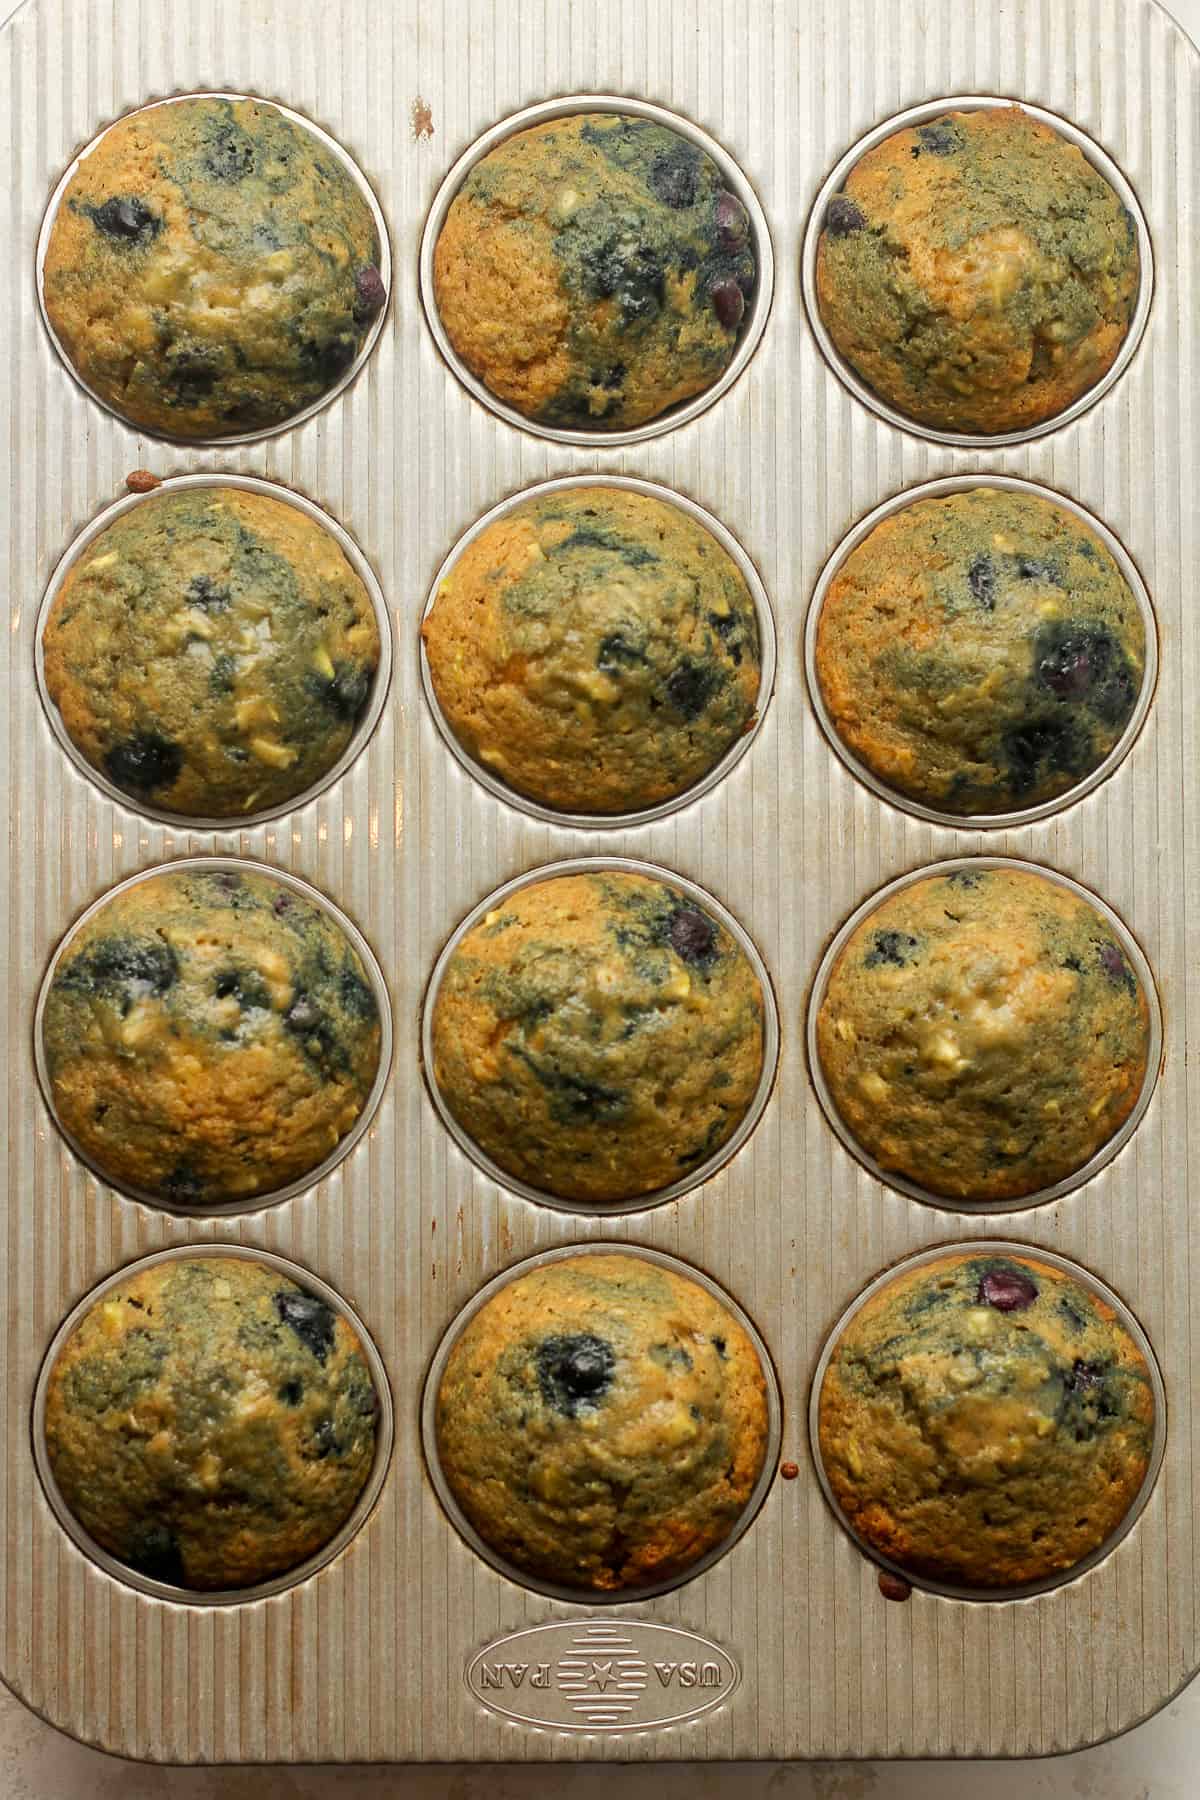 A muffin tin of just baked muffins.